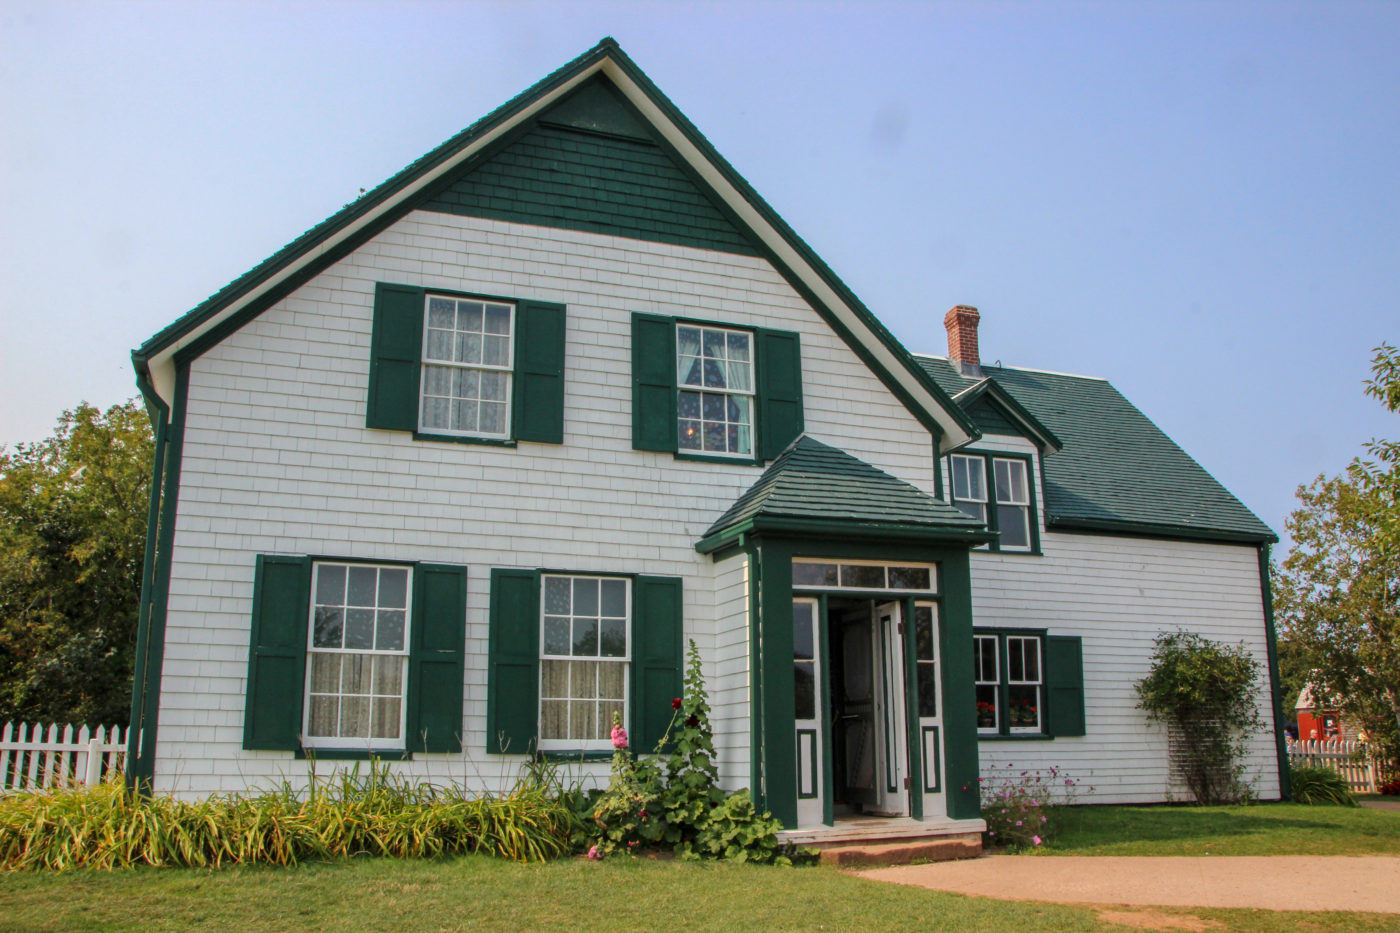 Inspirational Anne of Green Gables Farm Tour in PEI, Canada